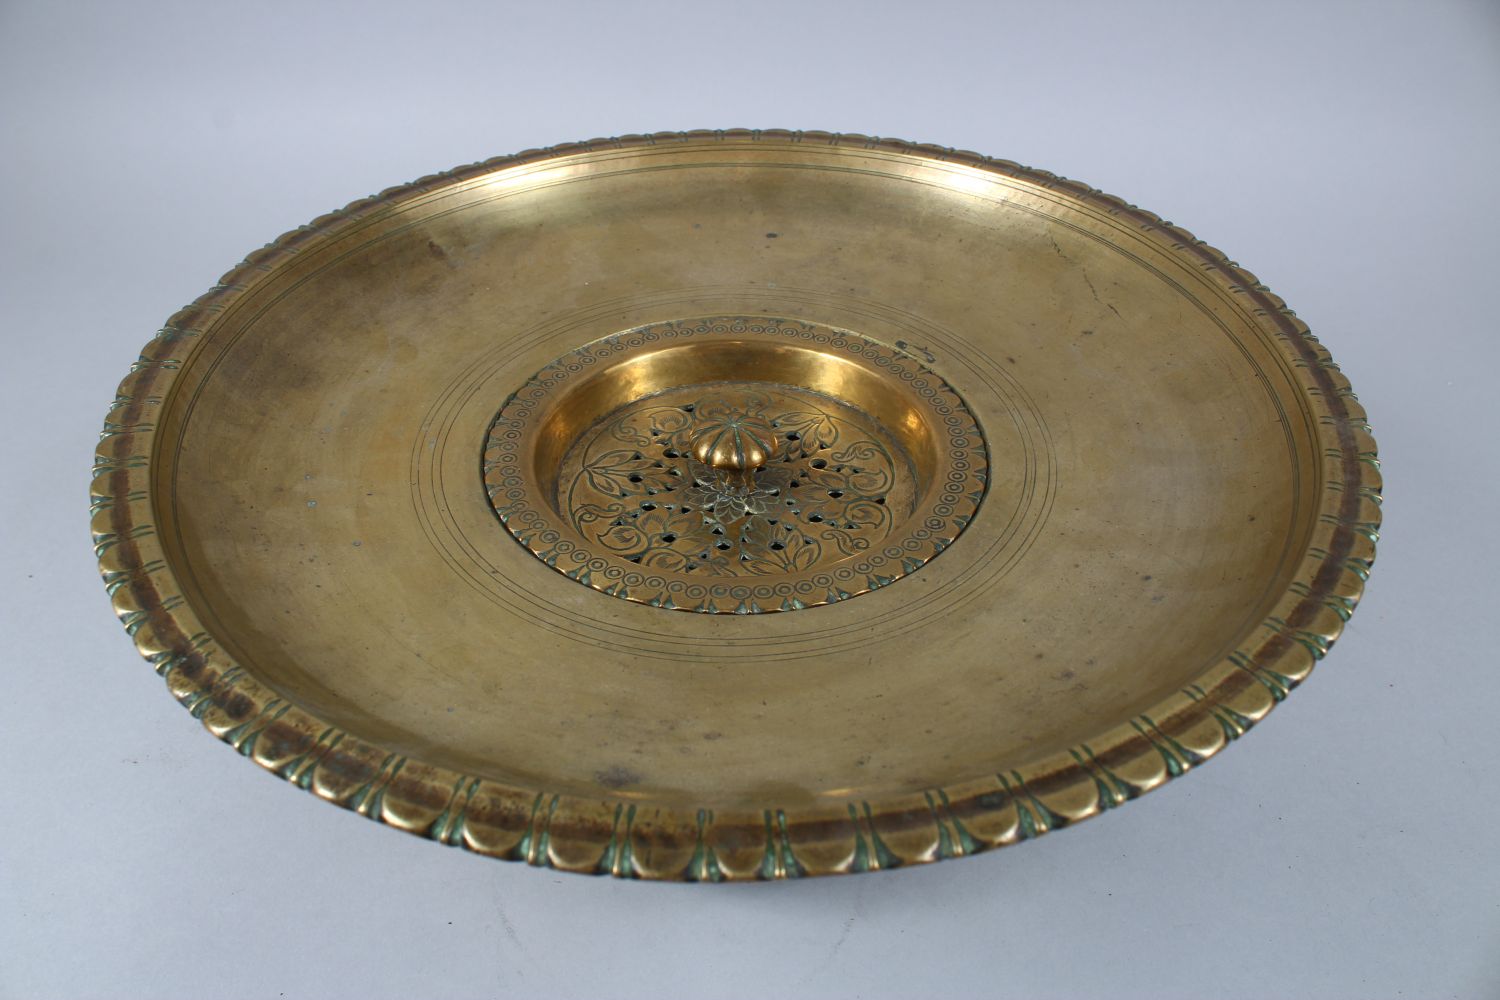 AN 18TH CENTURY MUGHAL INDIAN BRASS EWER & BASIN, the ewer 27cm high x 26cm wide. the basin 15cm - Image 4 of 6